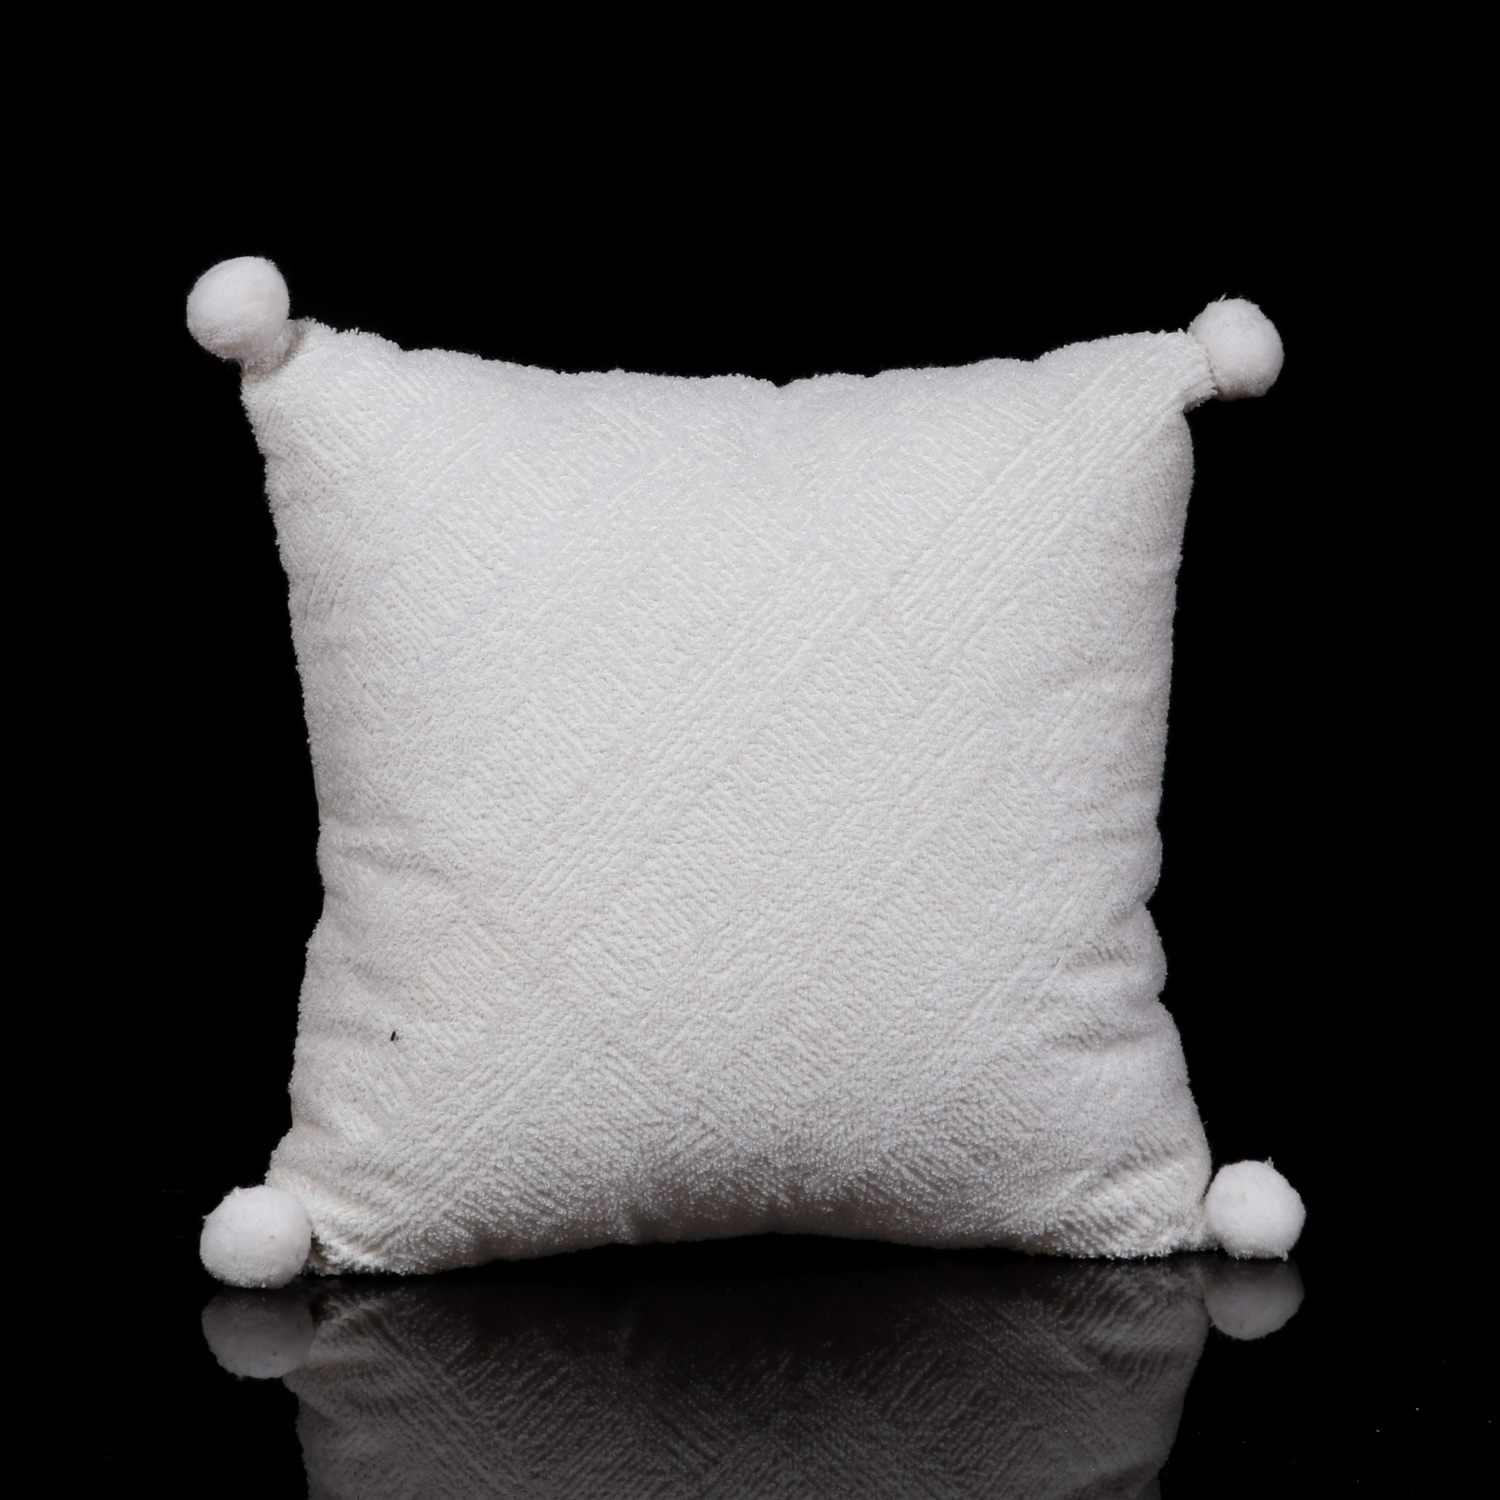 Pillow Covers with Pompoms Tassel